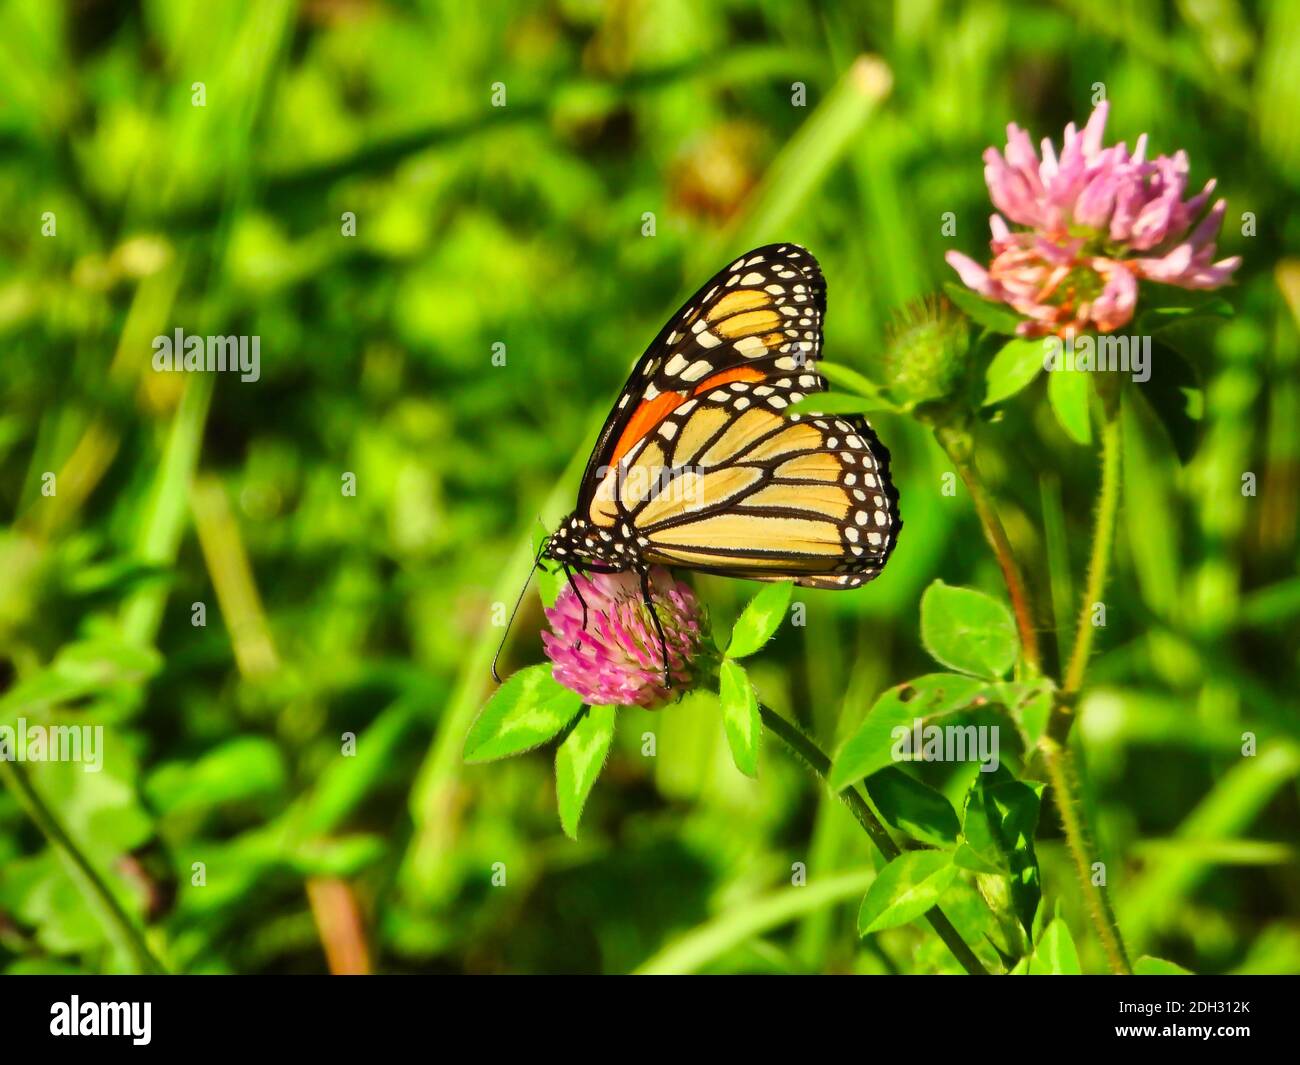 Monarch Butterfly Sits and Eats a Hot Pink Flower Bloom Showing Underside of Its Wing of Bright Yellow with Black Outline and White Spots with Green F Stock Photo